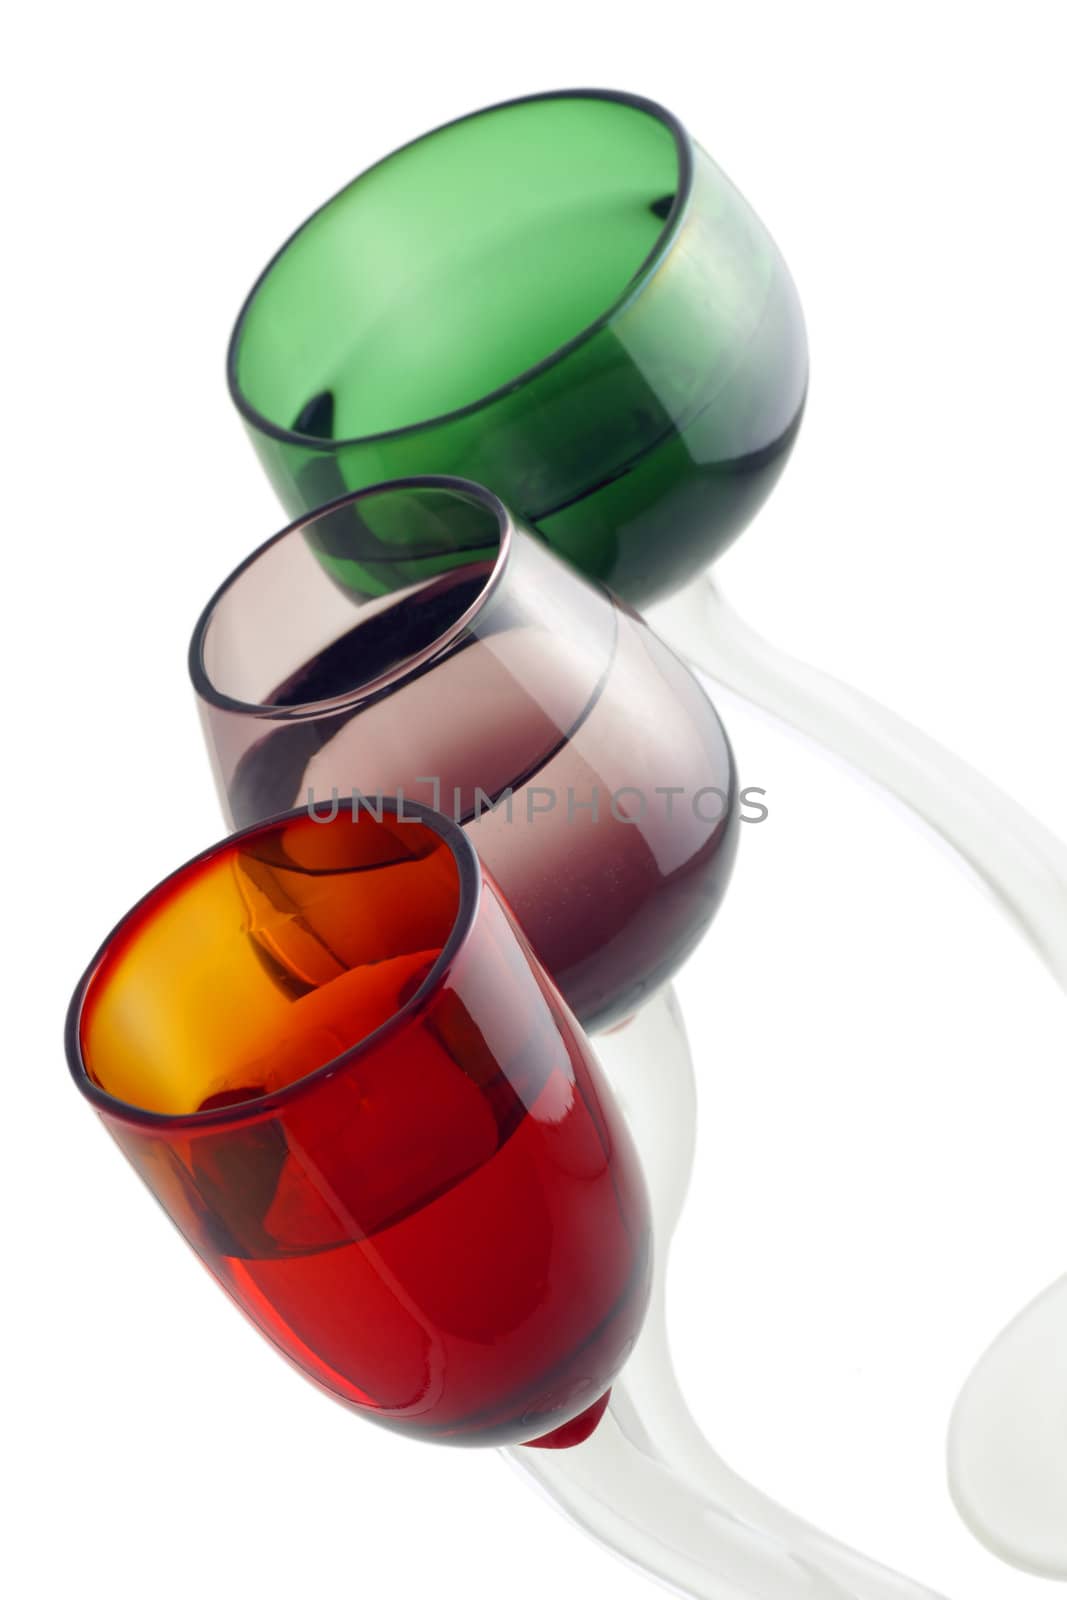 Three hand crafted beautiful colorful cocktail glasses.